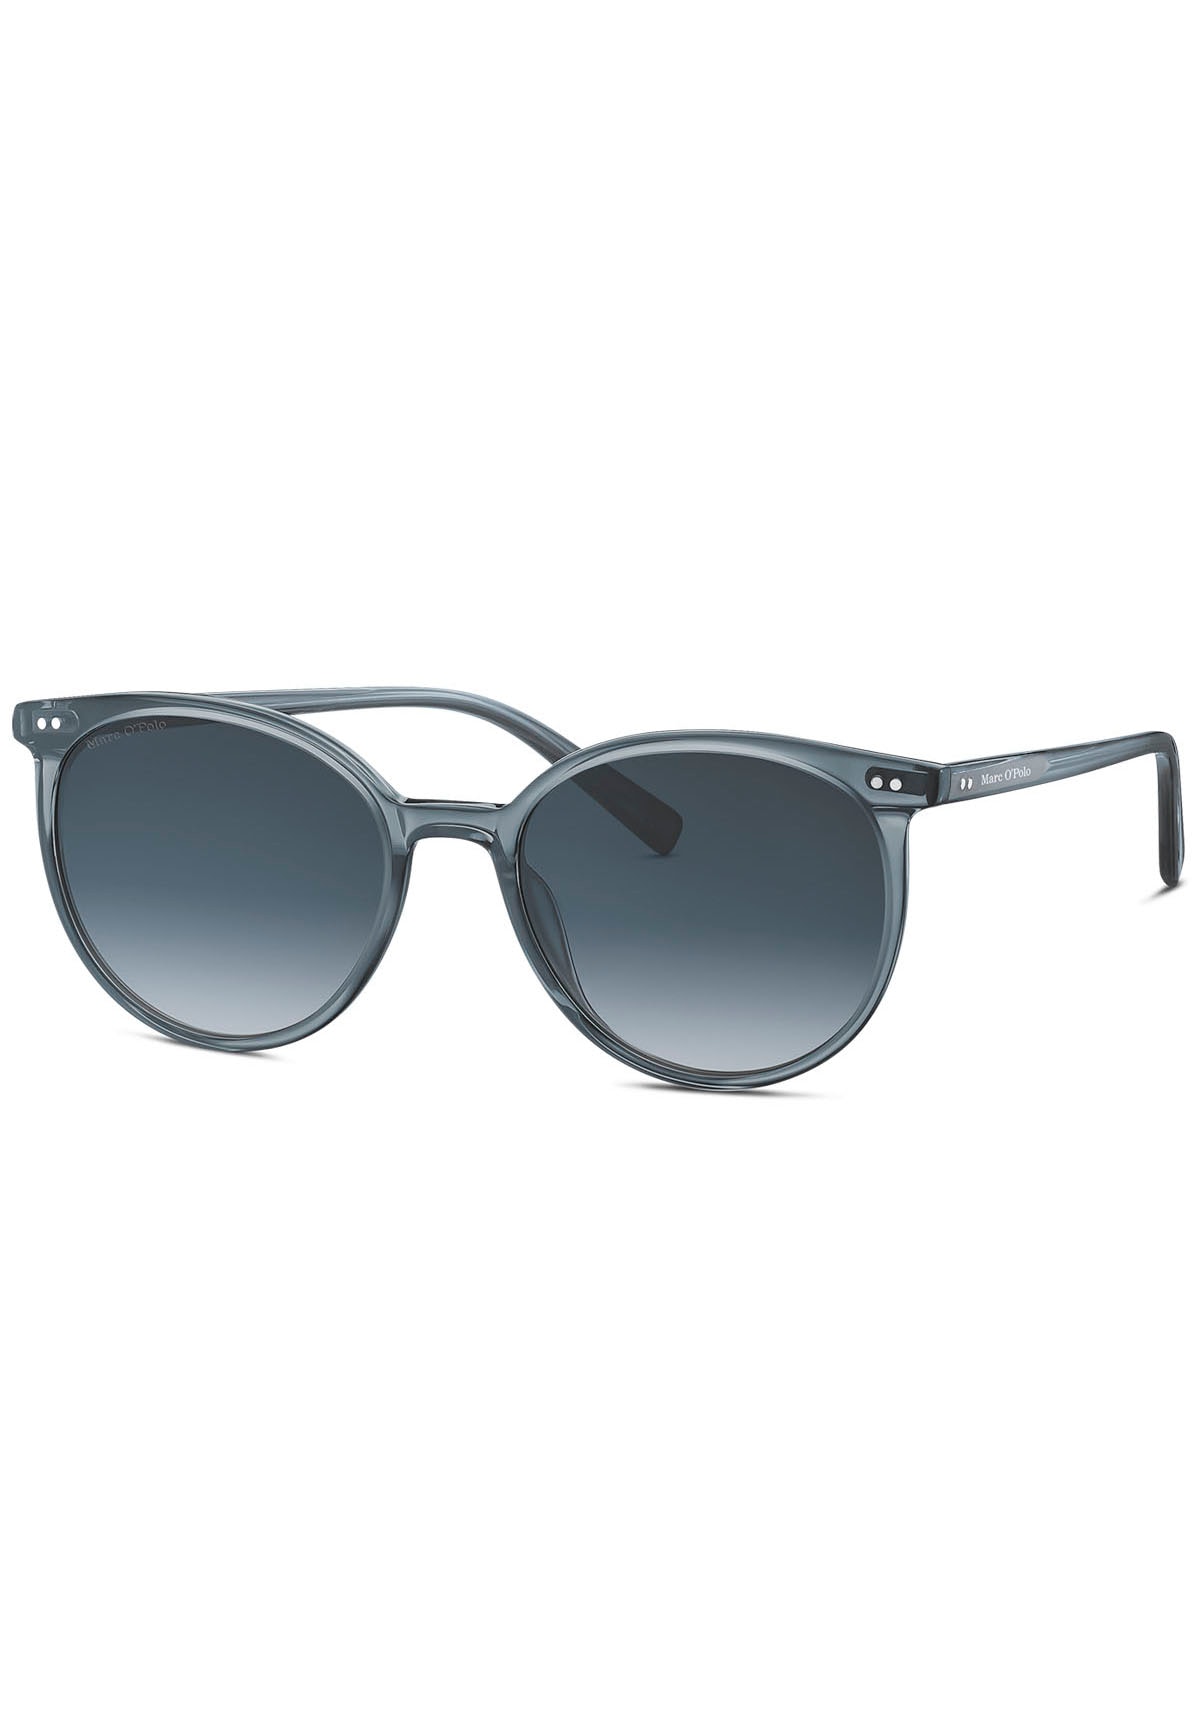 Marc O\'Polo Sonnenbrille »Modell 506164«, Panto-Form online bei OTTO